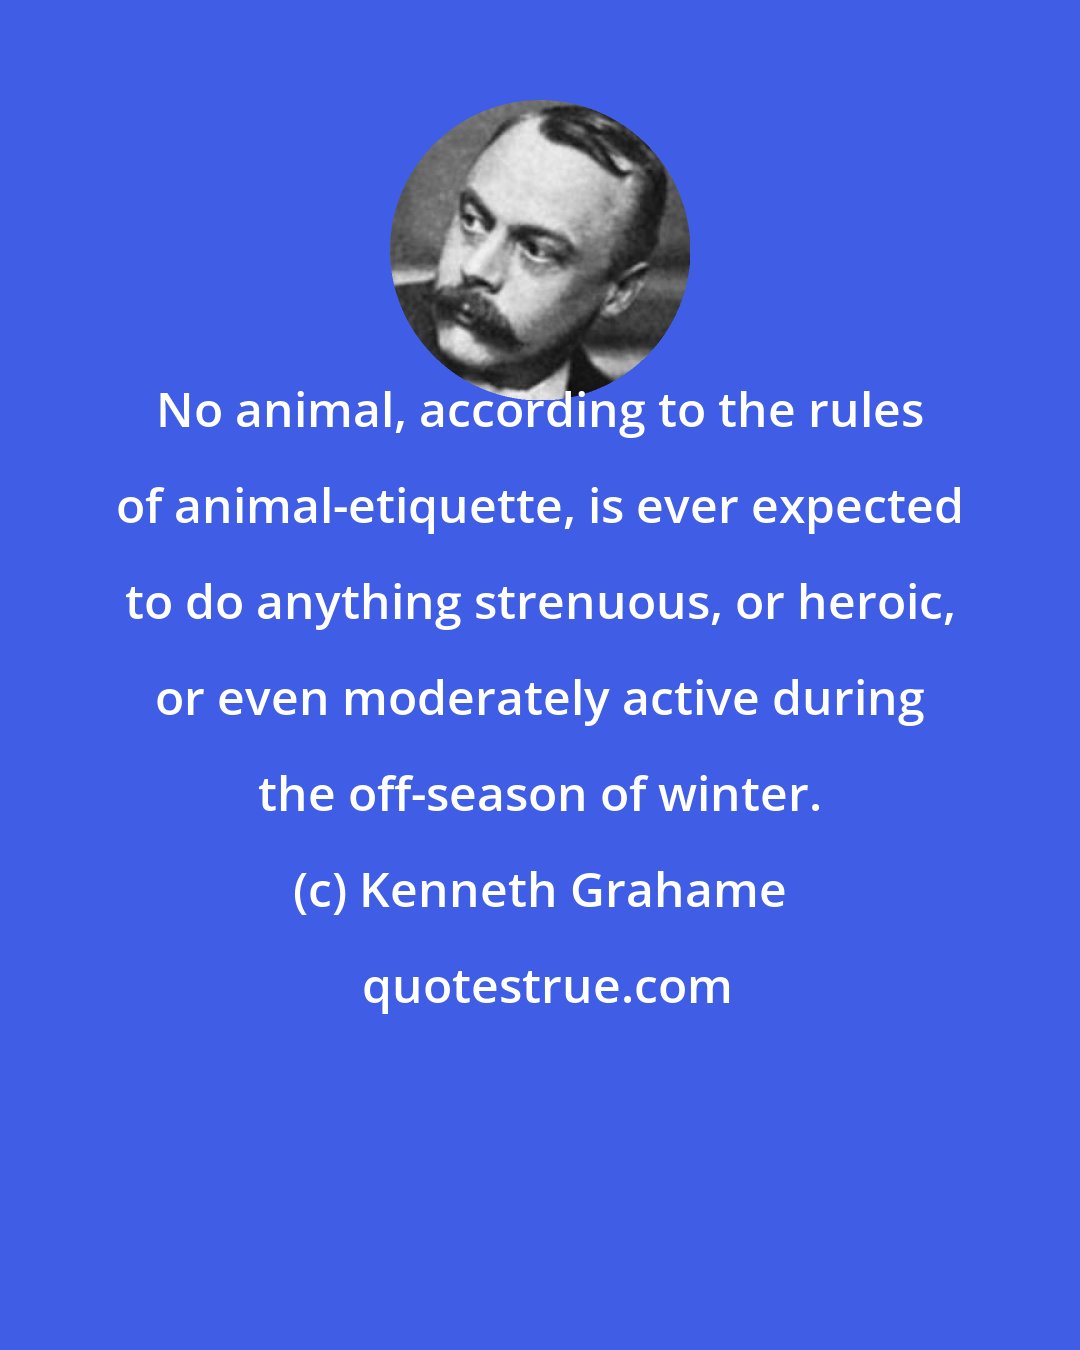 Kenneth Grahame: No animal, according to the rules of animal-etiquette, is ever expected to do anything strenuous, or heroic, or even moderately active during the off-season of winter.